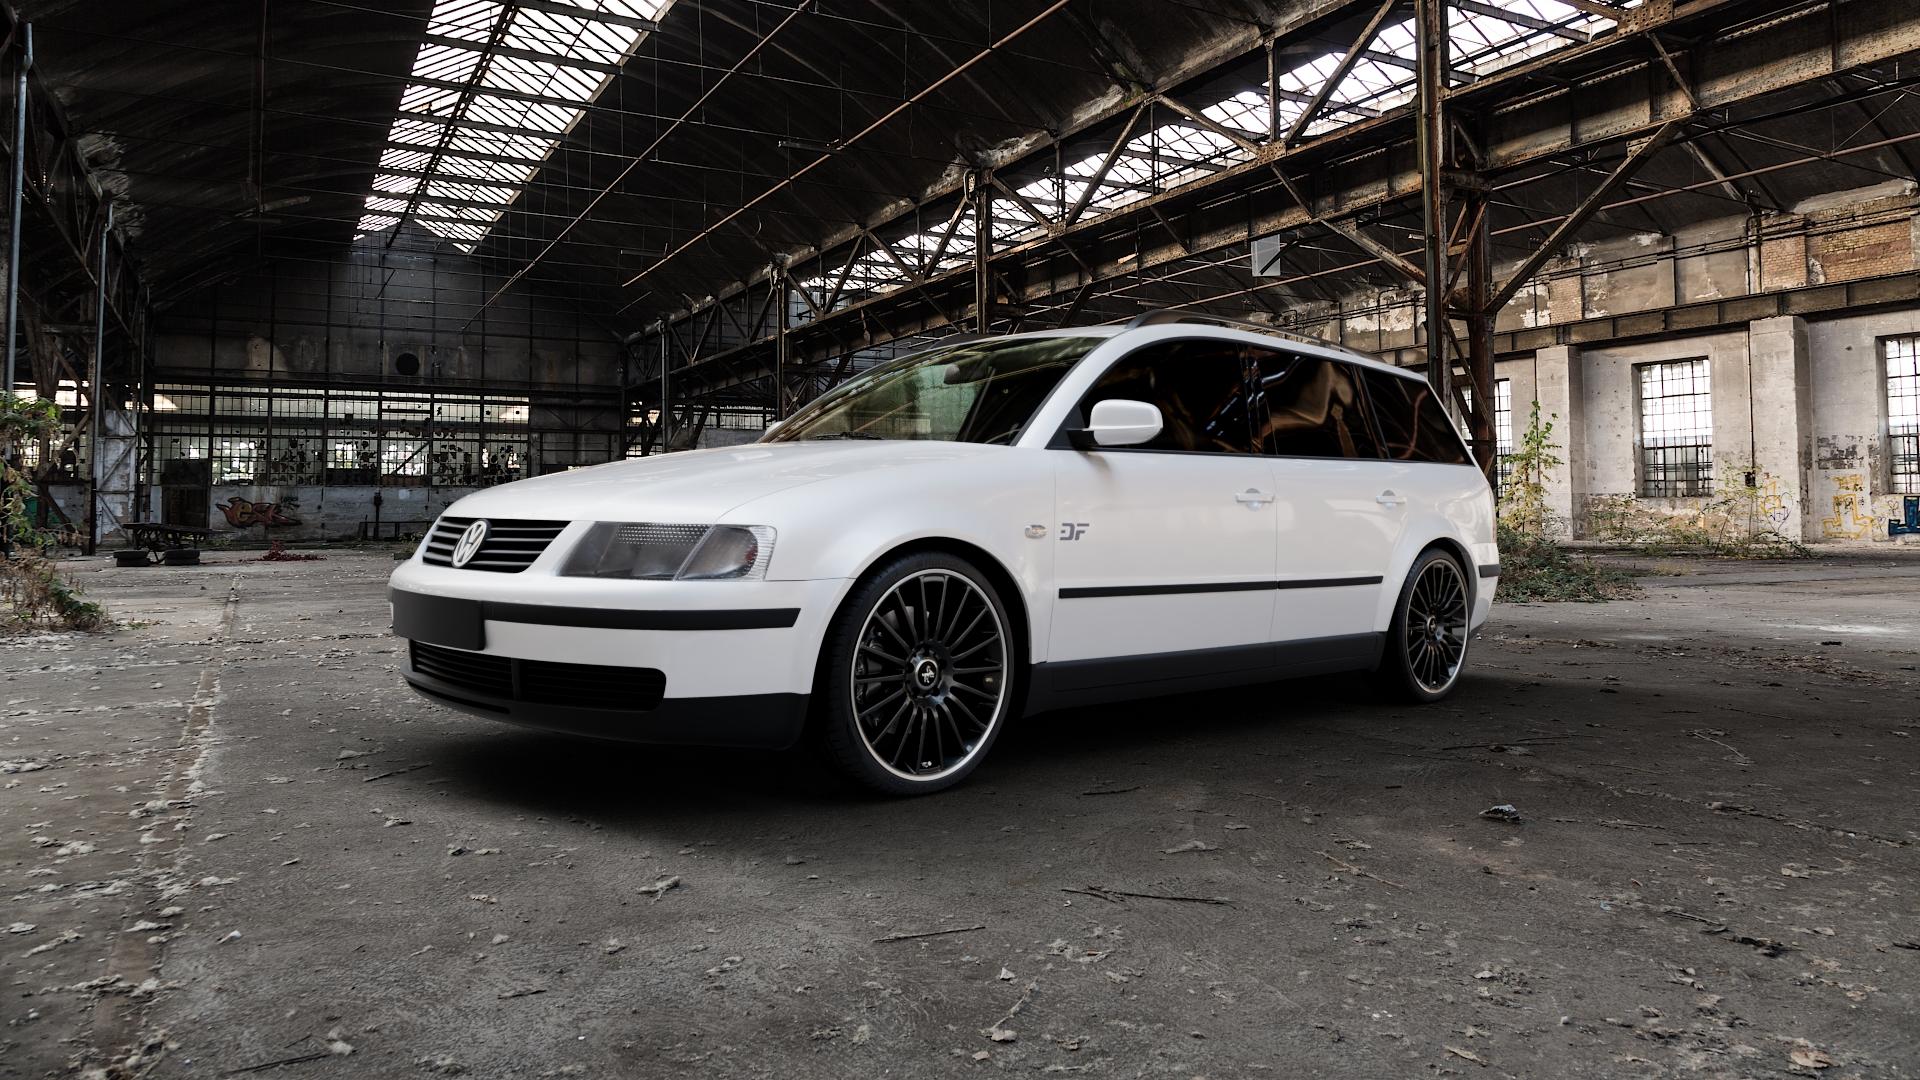 Volkswagen (VW) Passat 3B Limousine 1,9l TDI Syncro 81kW (110 hp) Wheels  and Tyre Packages | velonity.com